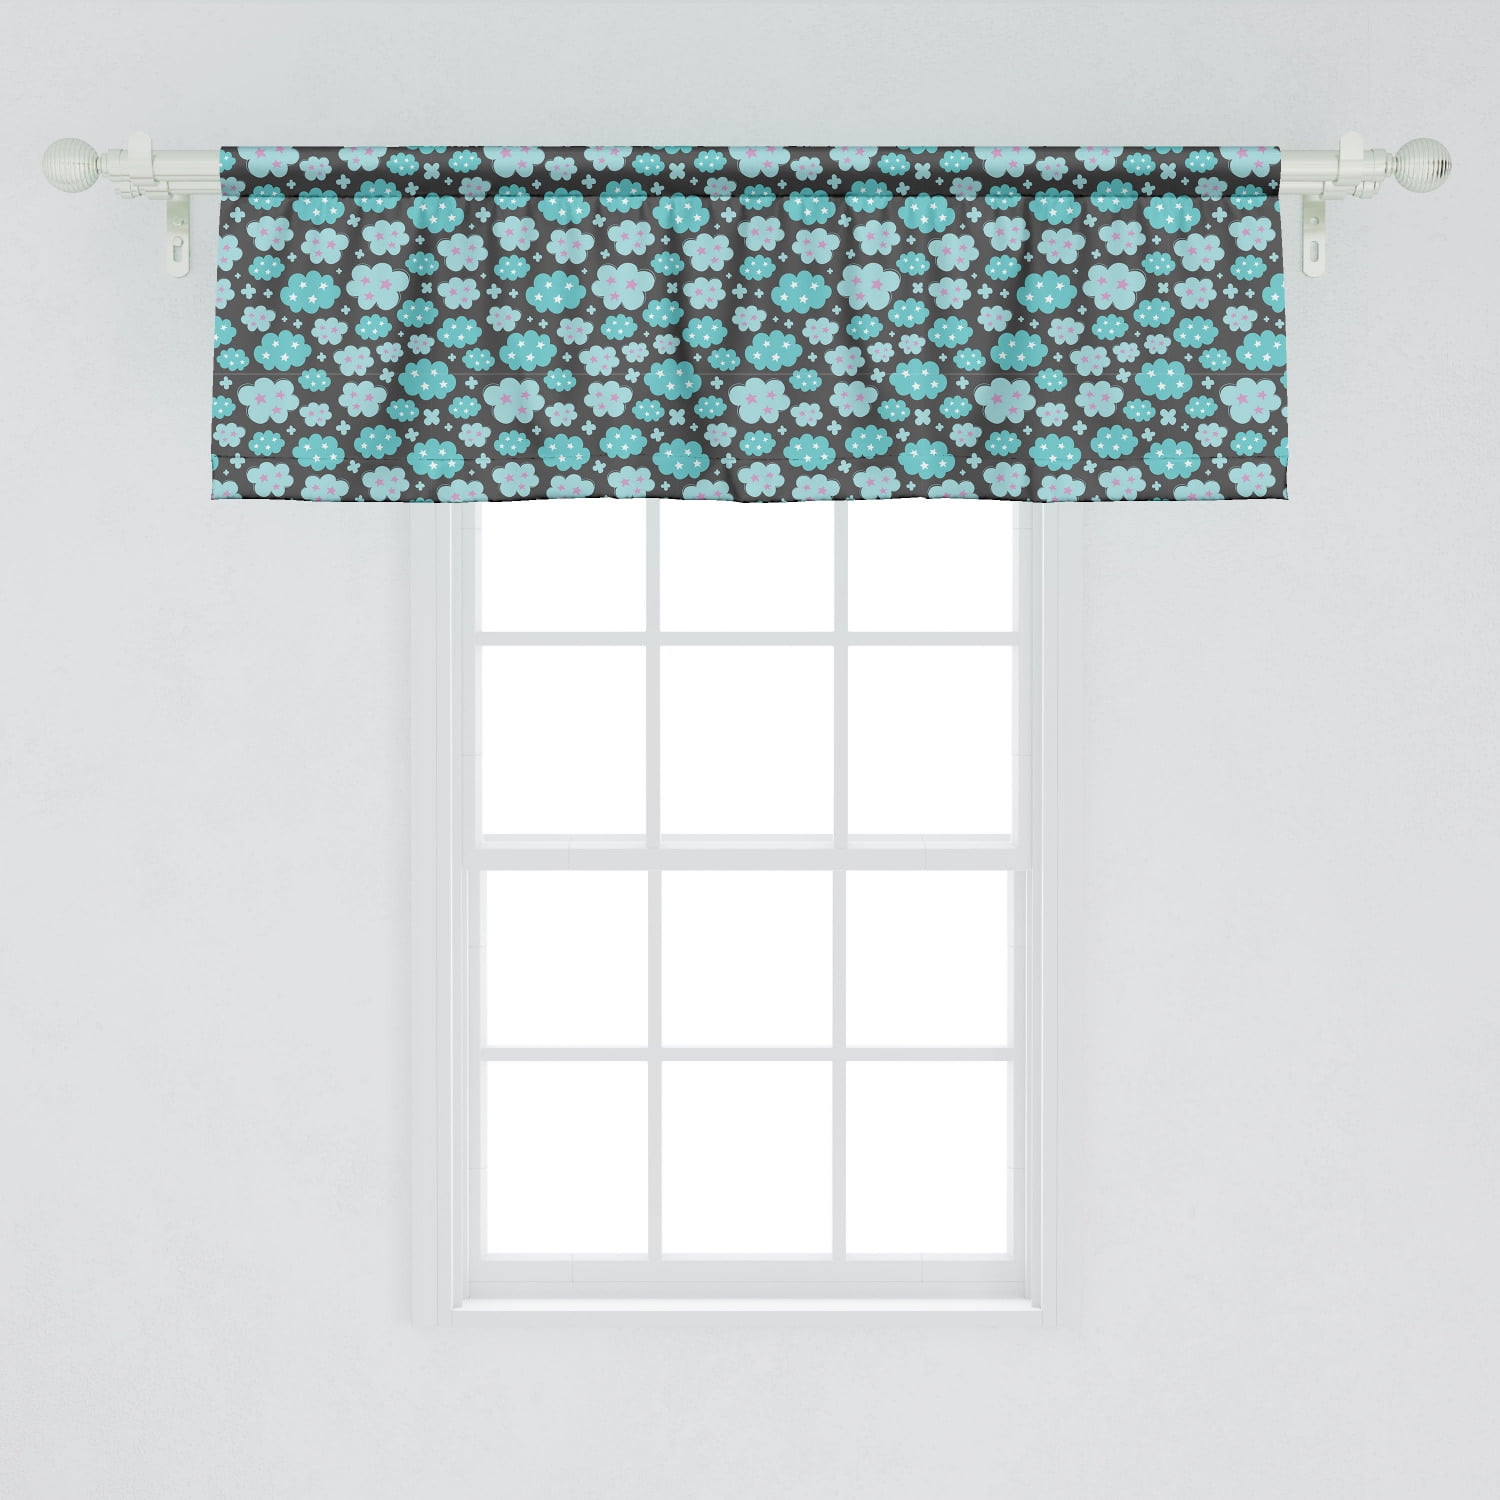 Ambesonne Cloud Window Valance, Cartoon Style Composition with Star ...